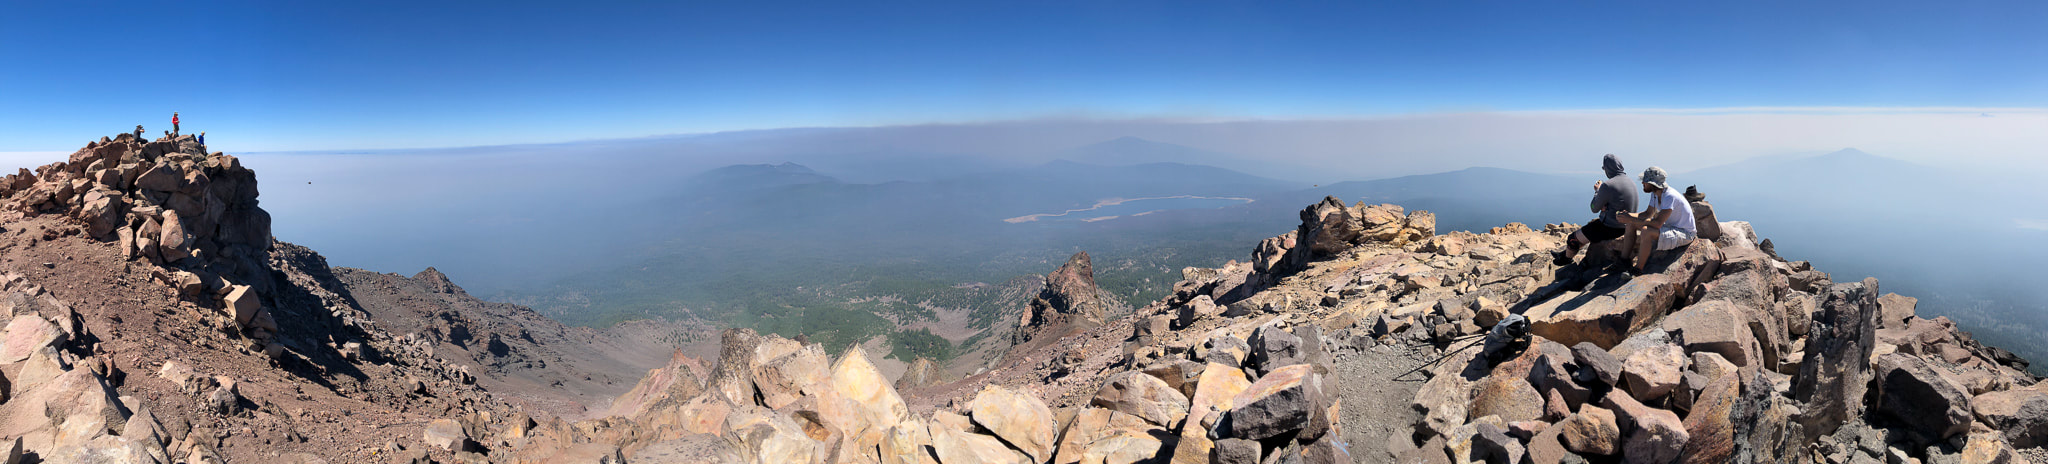 Panorama view from Mt. McLoughlin summit